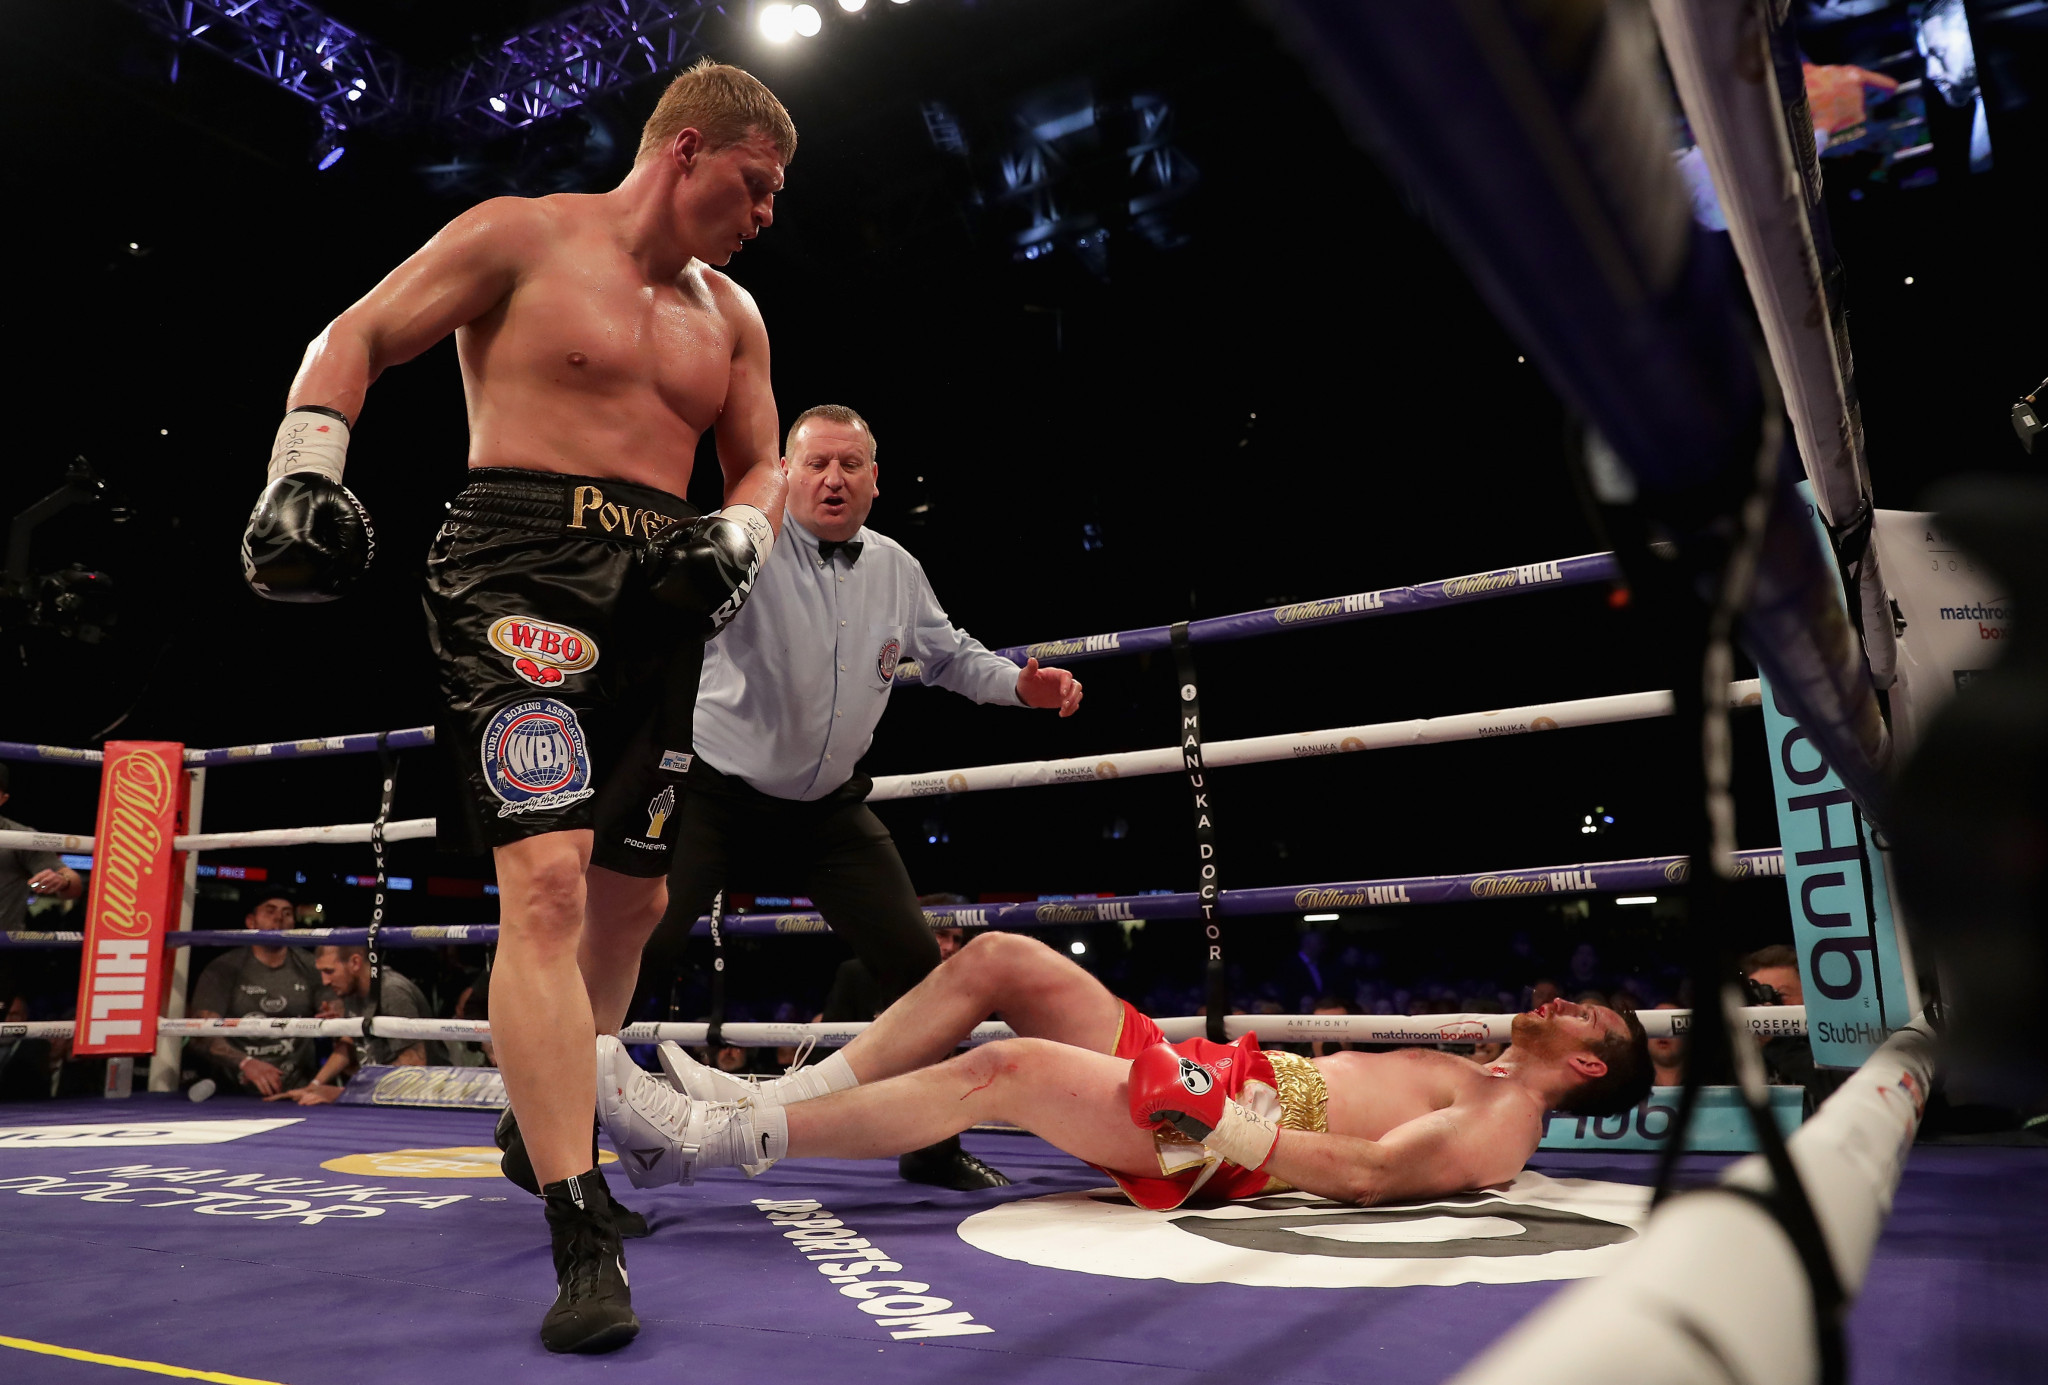 Russia's world heavyweight champion and Olympic gold medallist Alexander Povetkin has twice failed drugs tests during his professional career but been allowed to continue fighting ©Getty Images